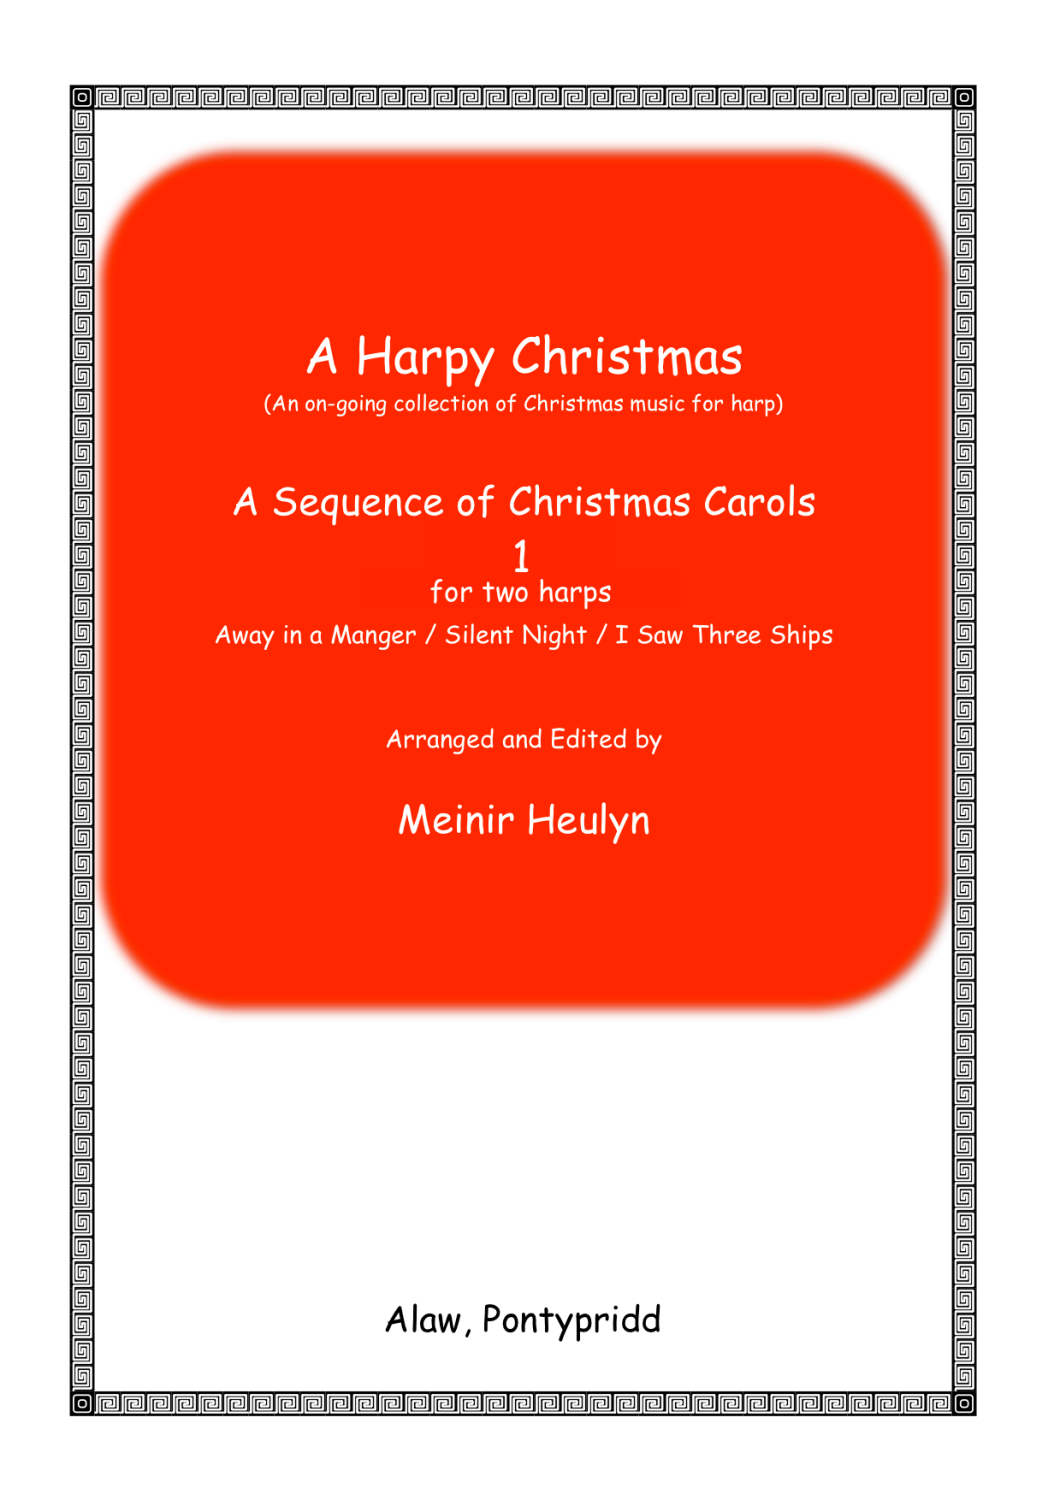 A Harpy Christmas - A Sequence of Christmas Carols for Two Lever Harps 